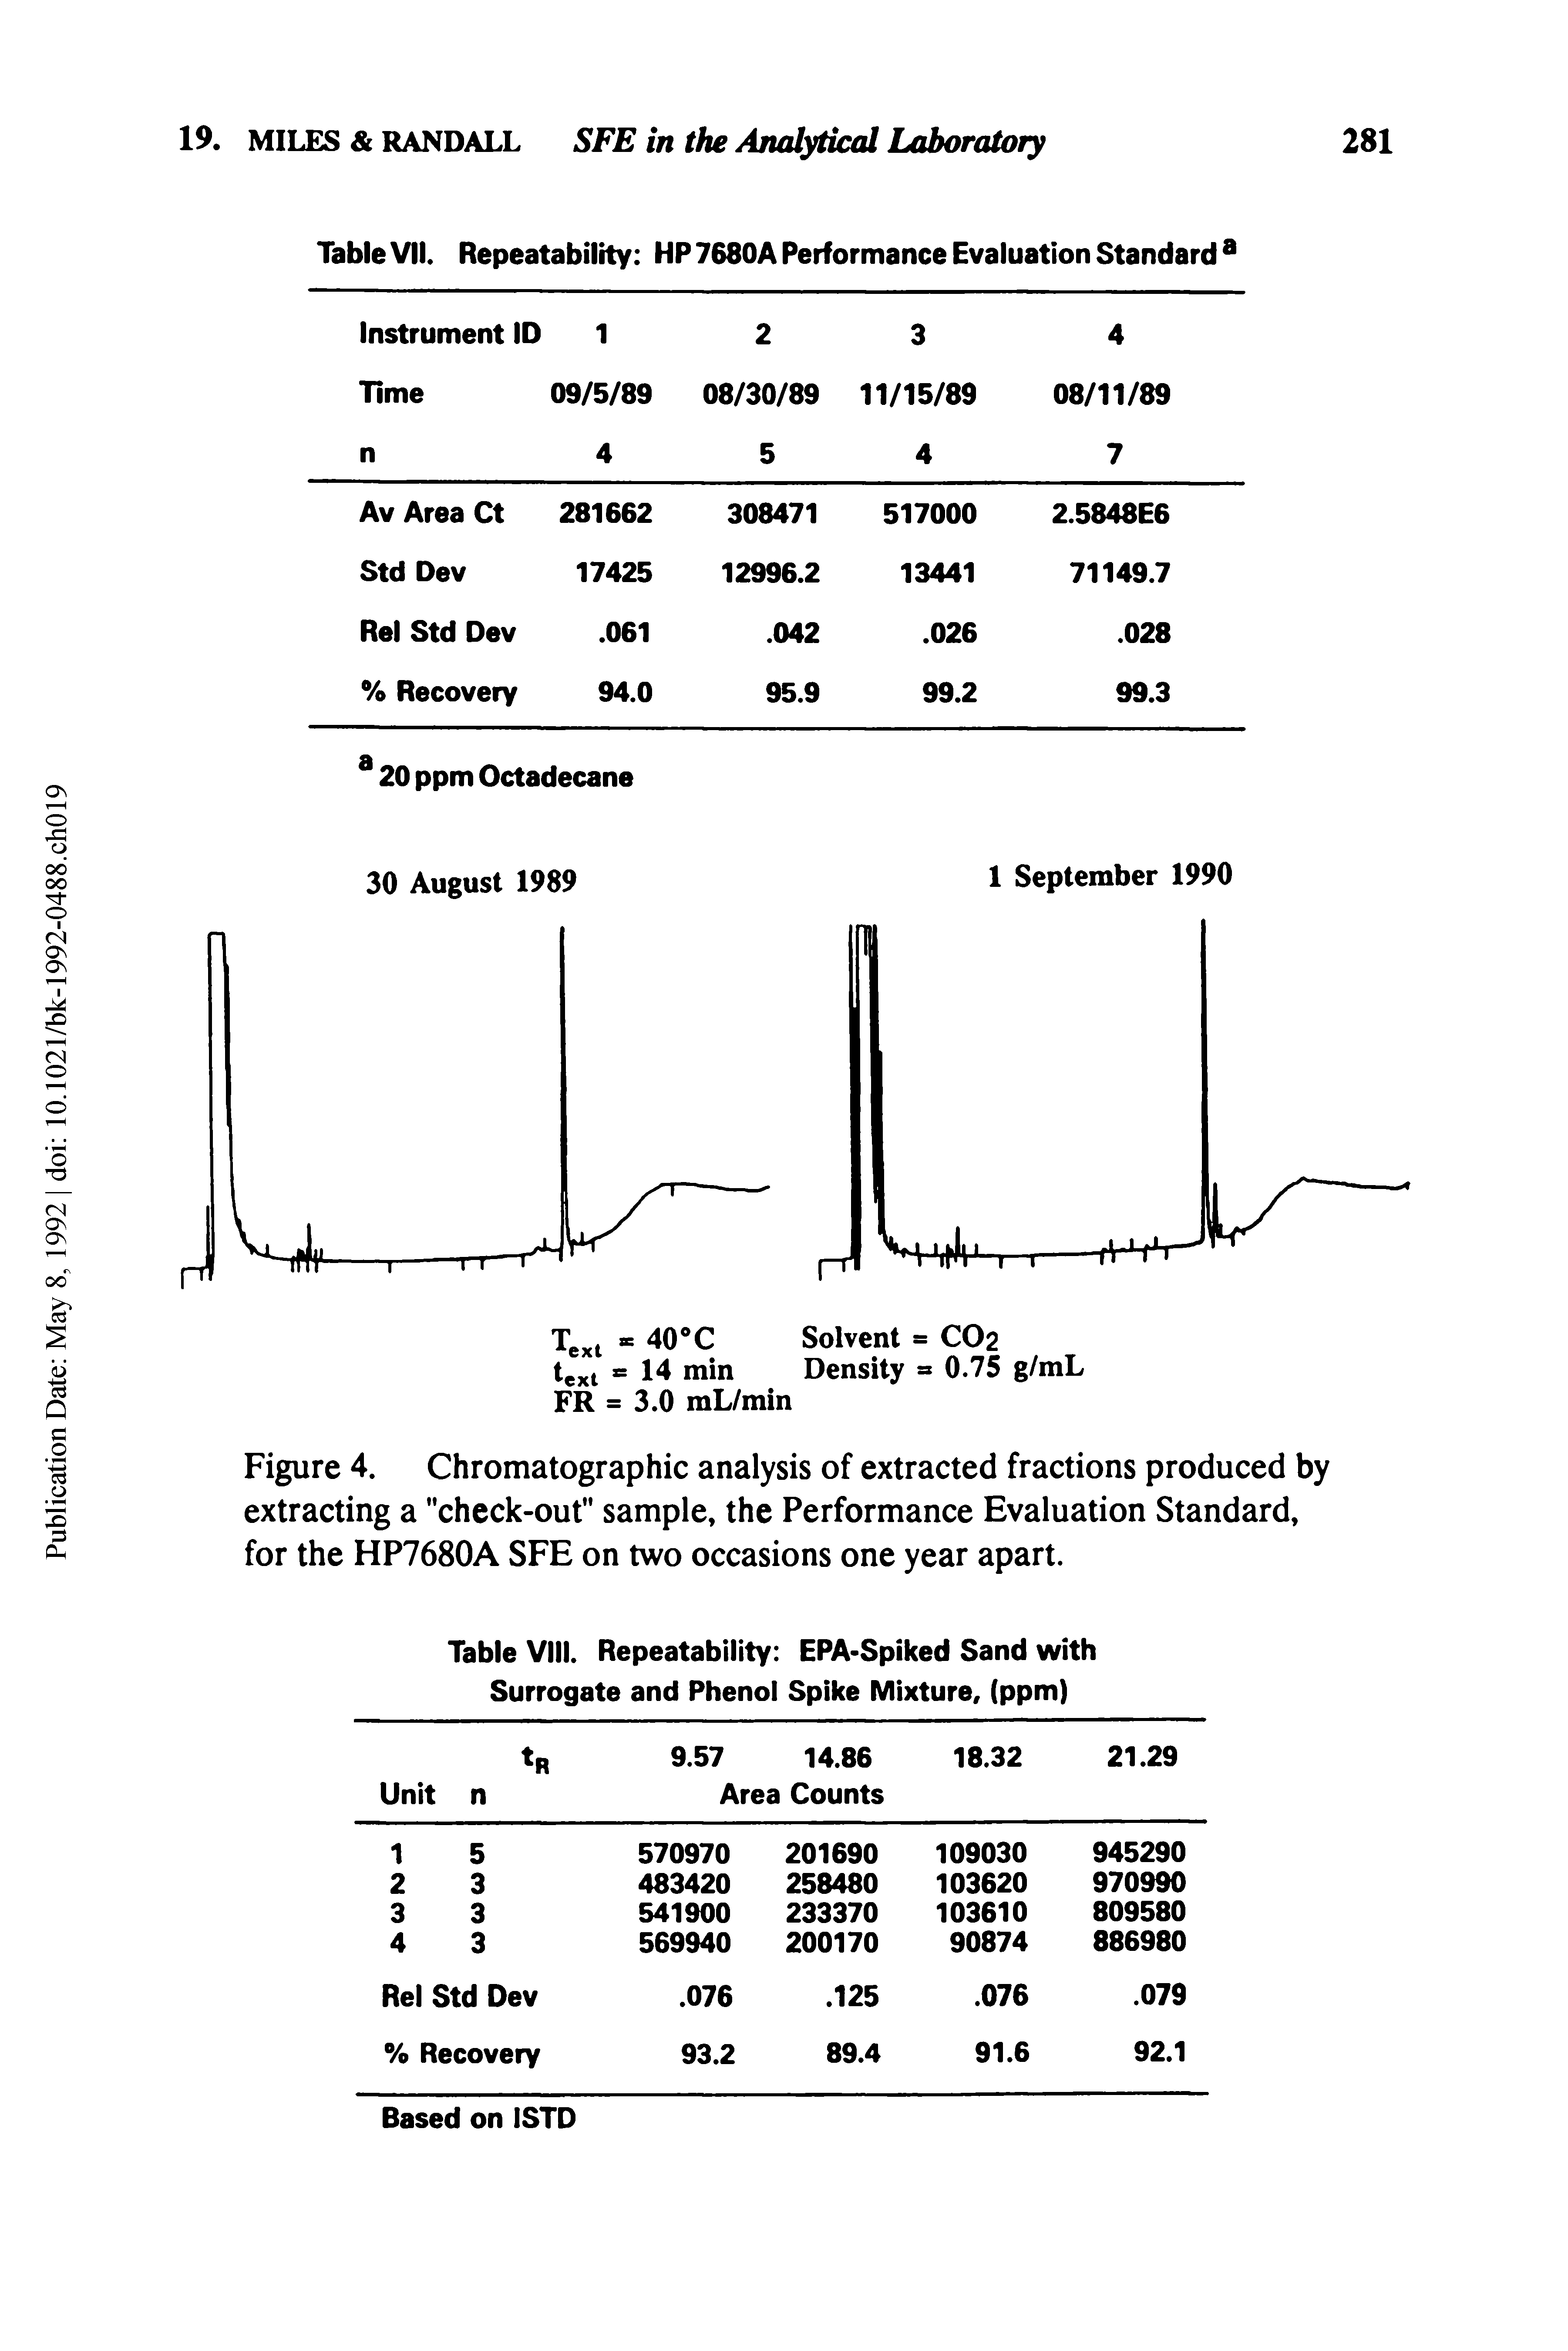 Figure 4. Chromatographic analysis of extracted fractions produced by extracting a "check-out" sample, the Performance Evaluation Standard, for the HP7680A SFE on two occasions one year apart.